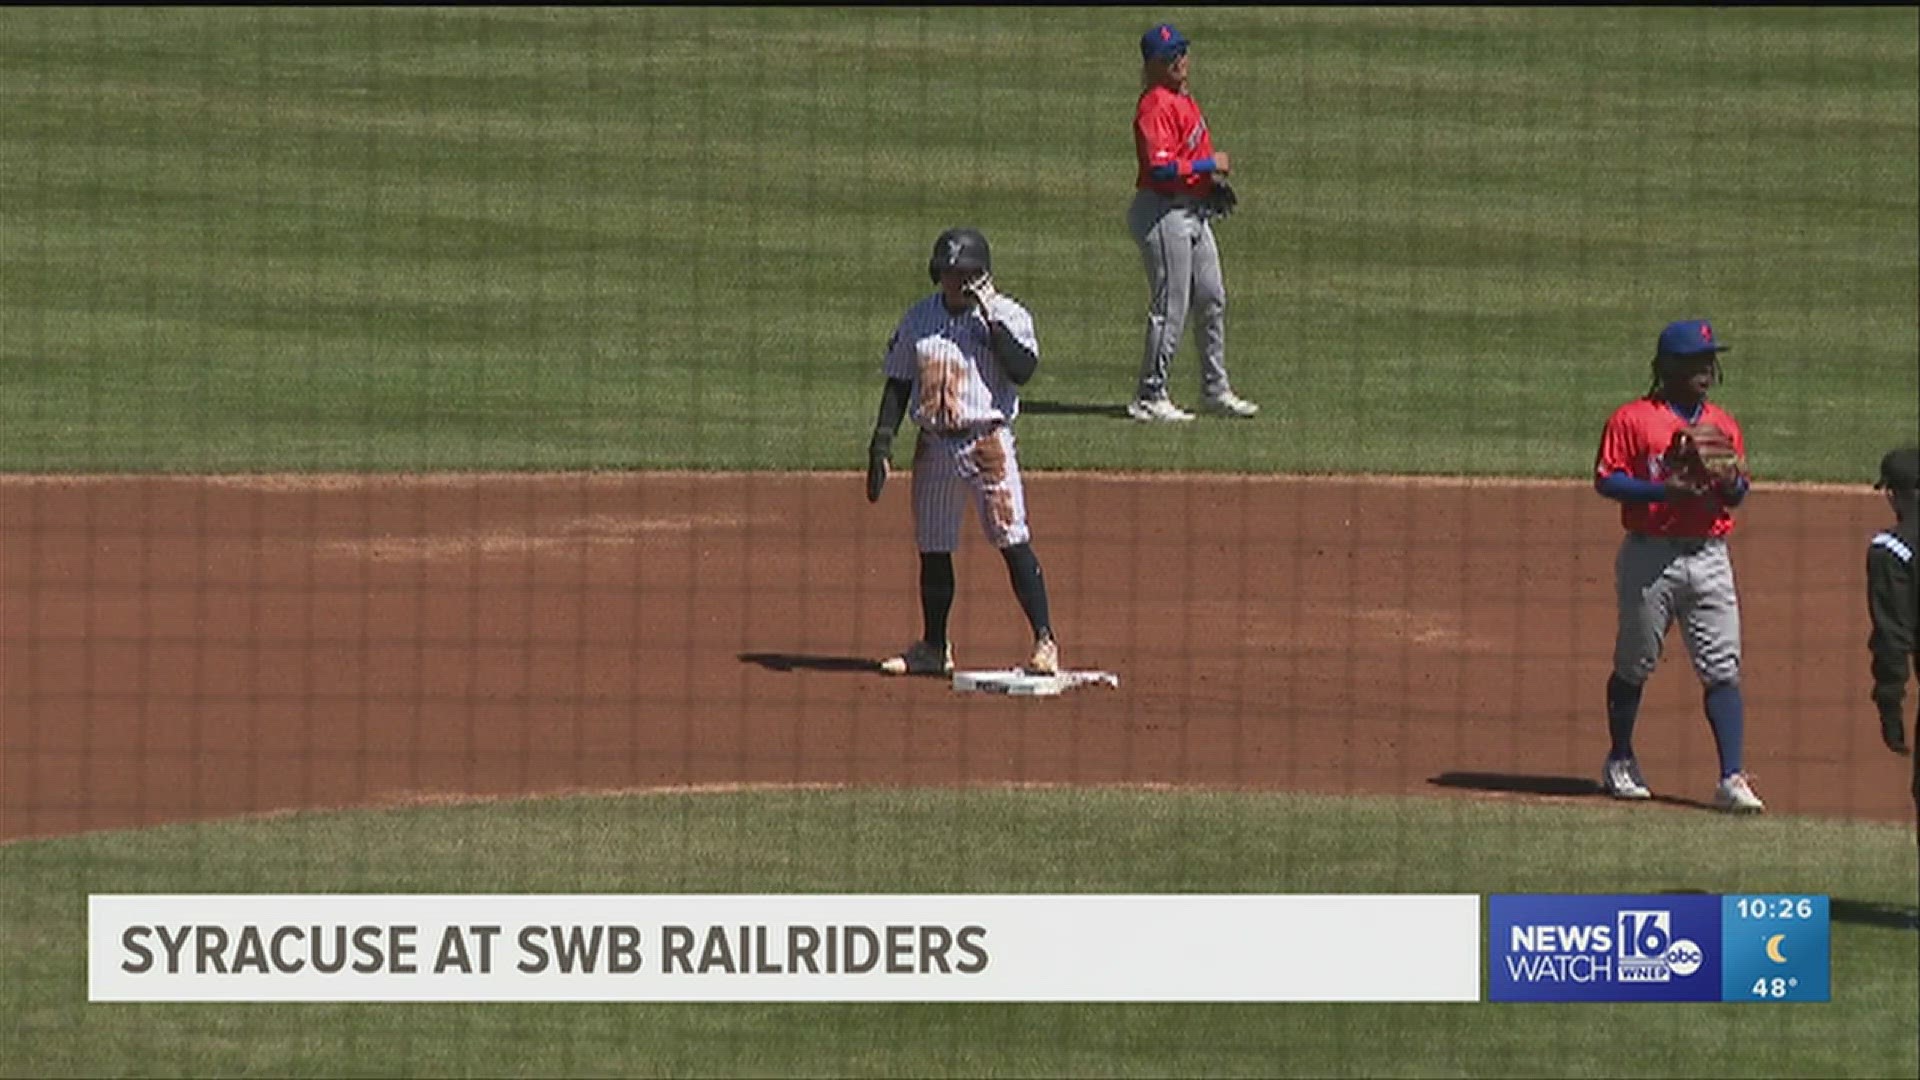 Durbin with another big day at the plate for SWB